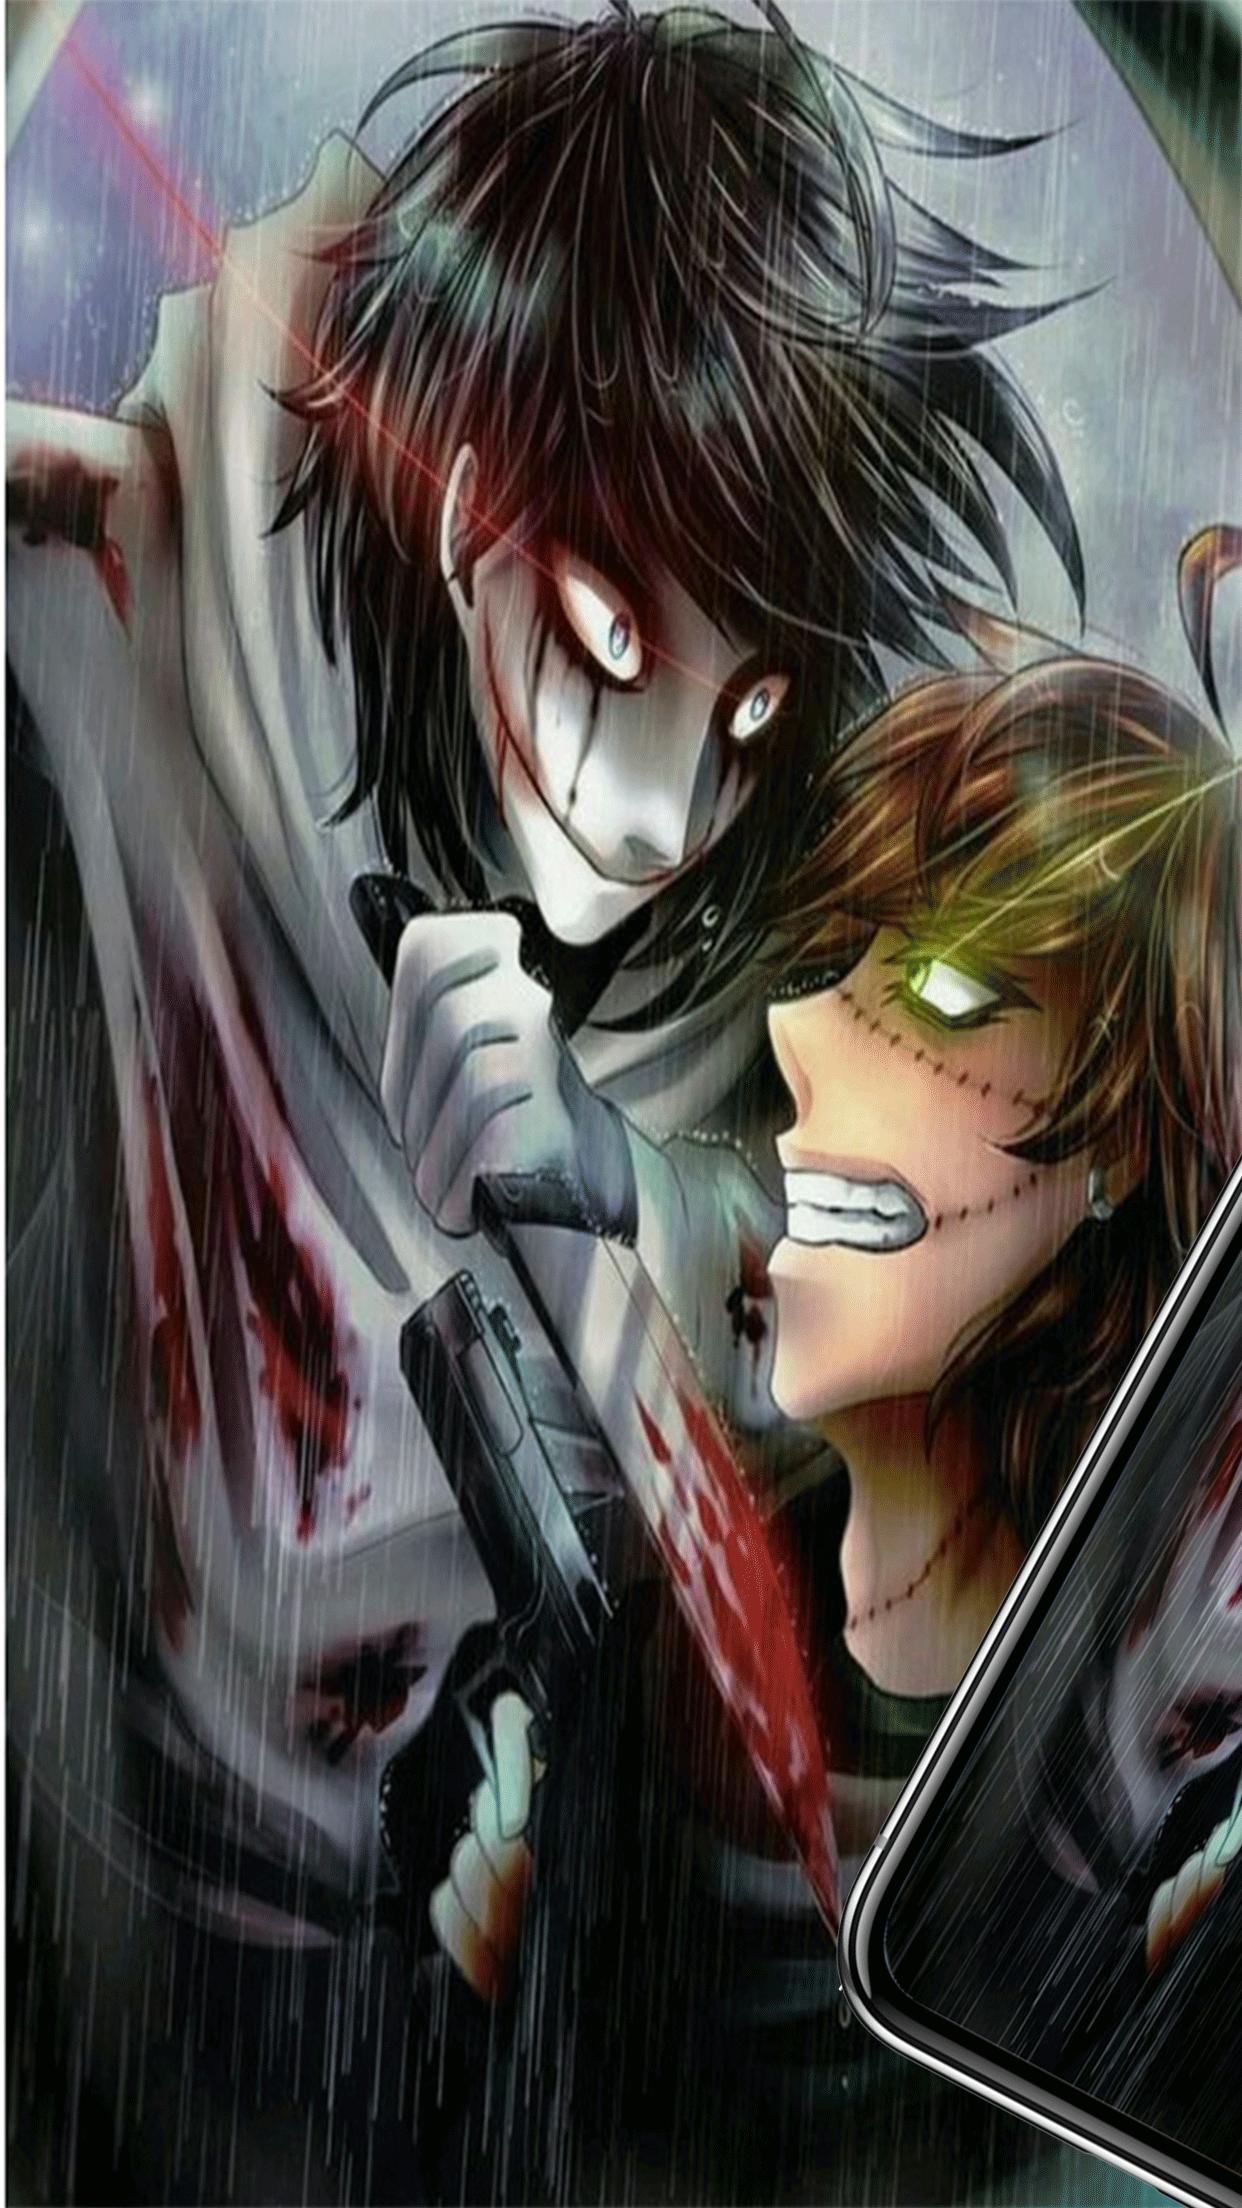 Jeff Wallpapers Creepypasta The Killer anime for Android ...